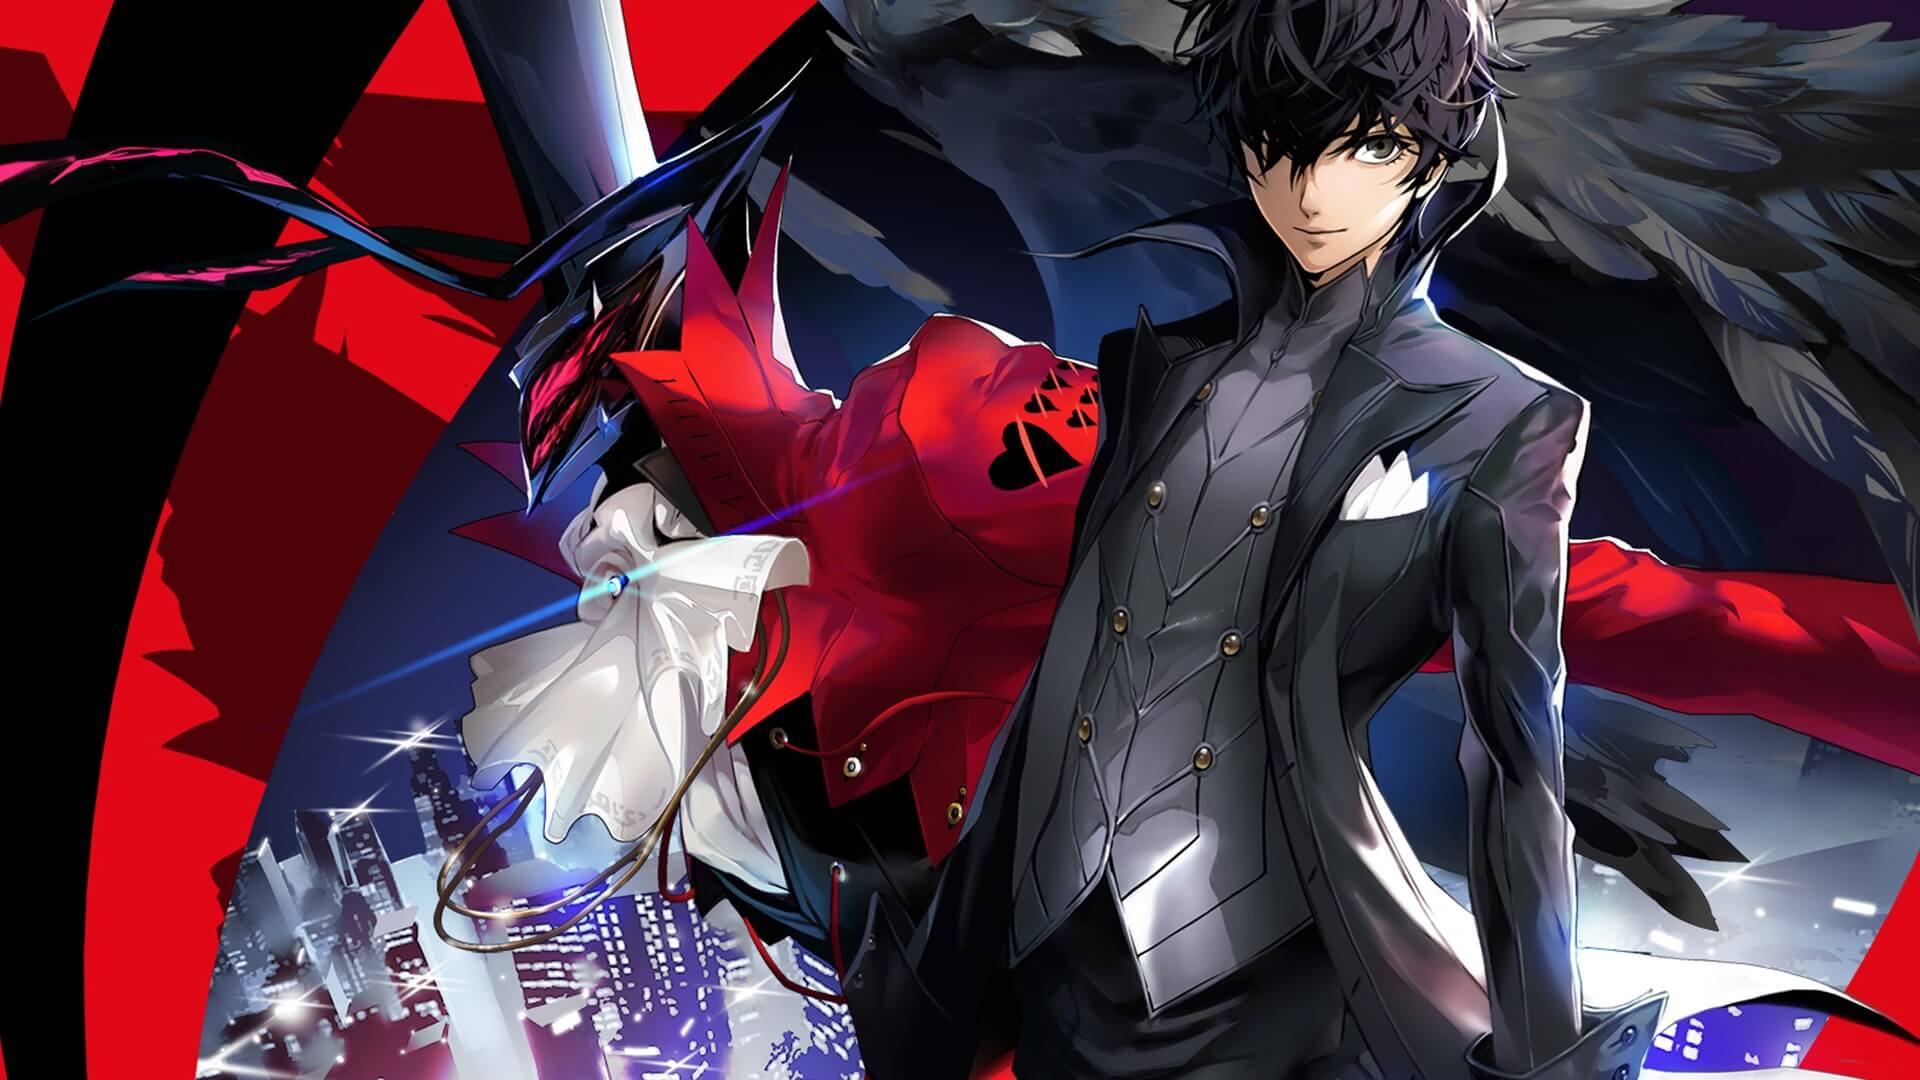 Persona 5 for Switch is not your father's RPG